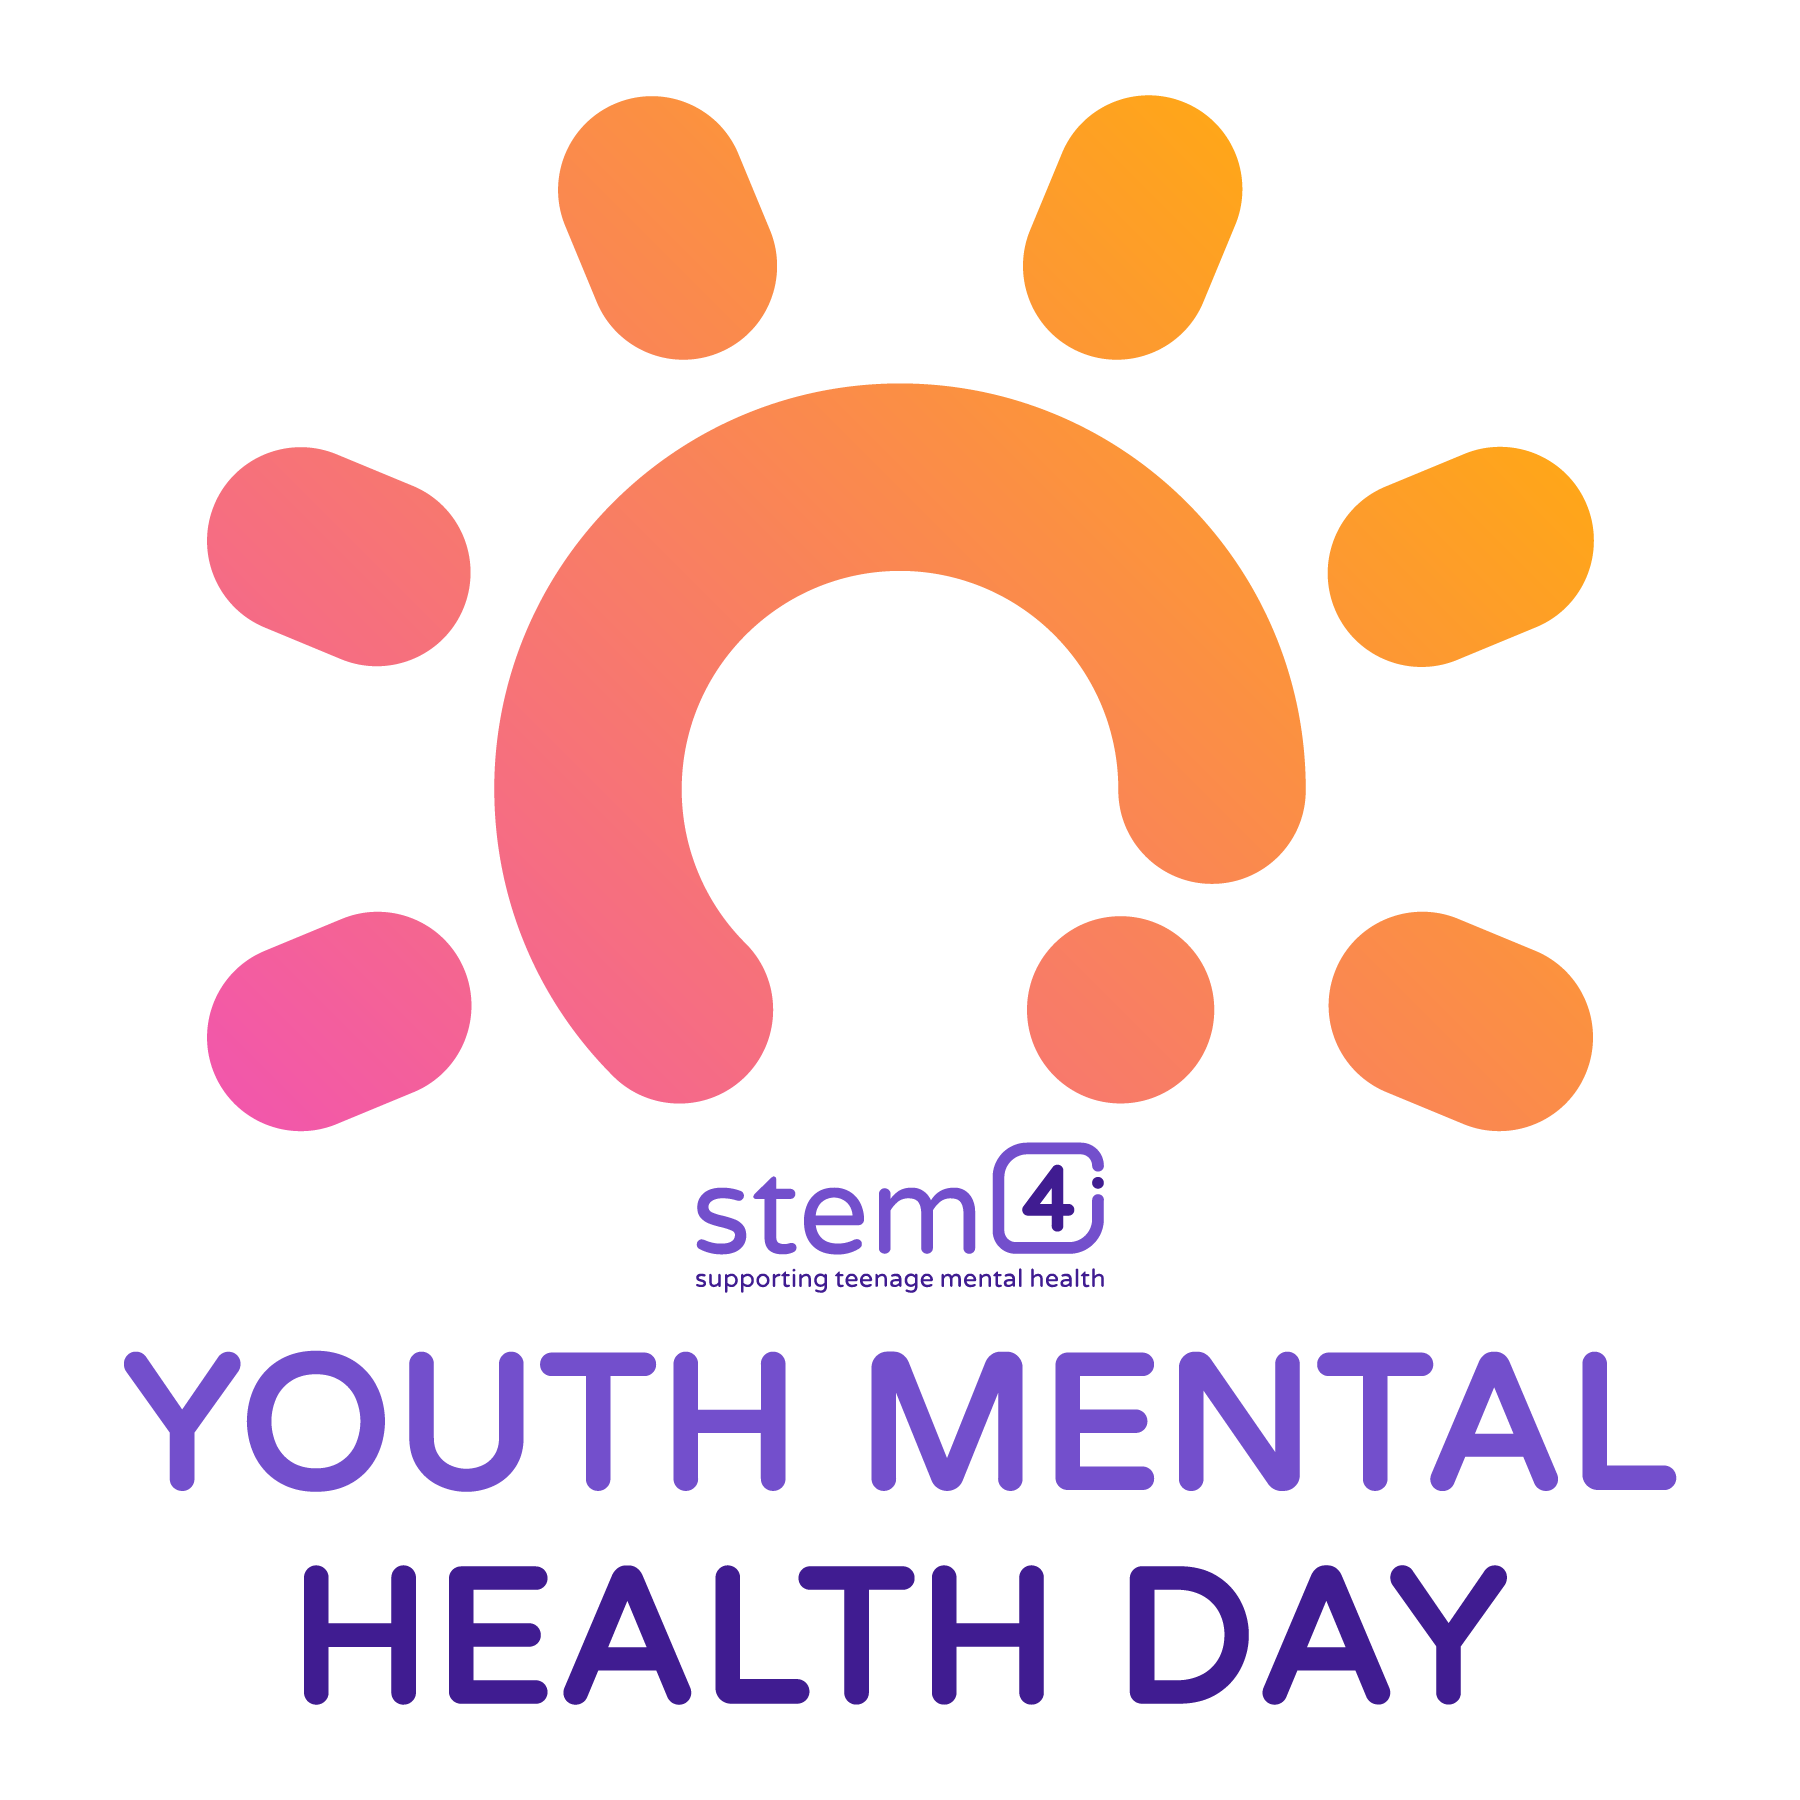 stem4's Youth Mental Health Day